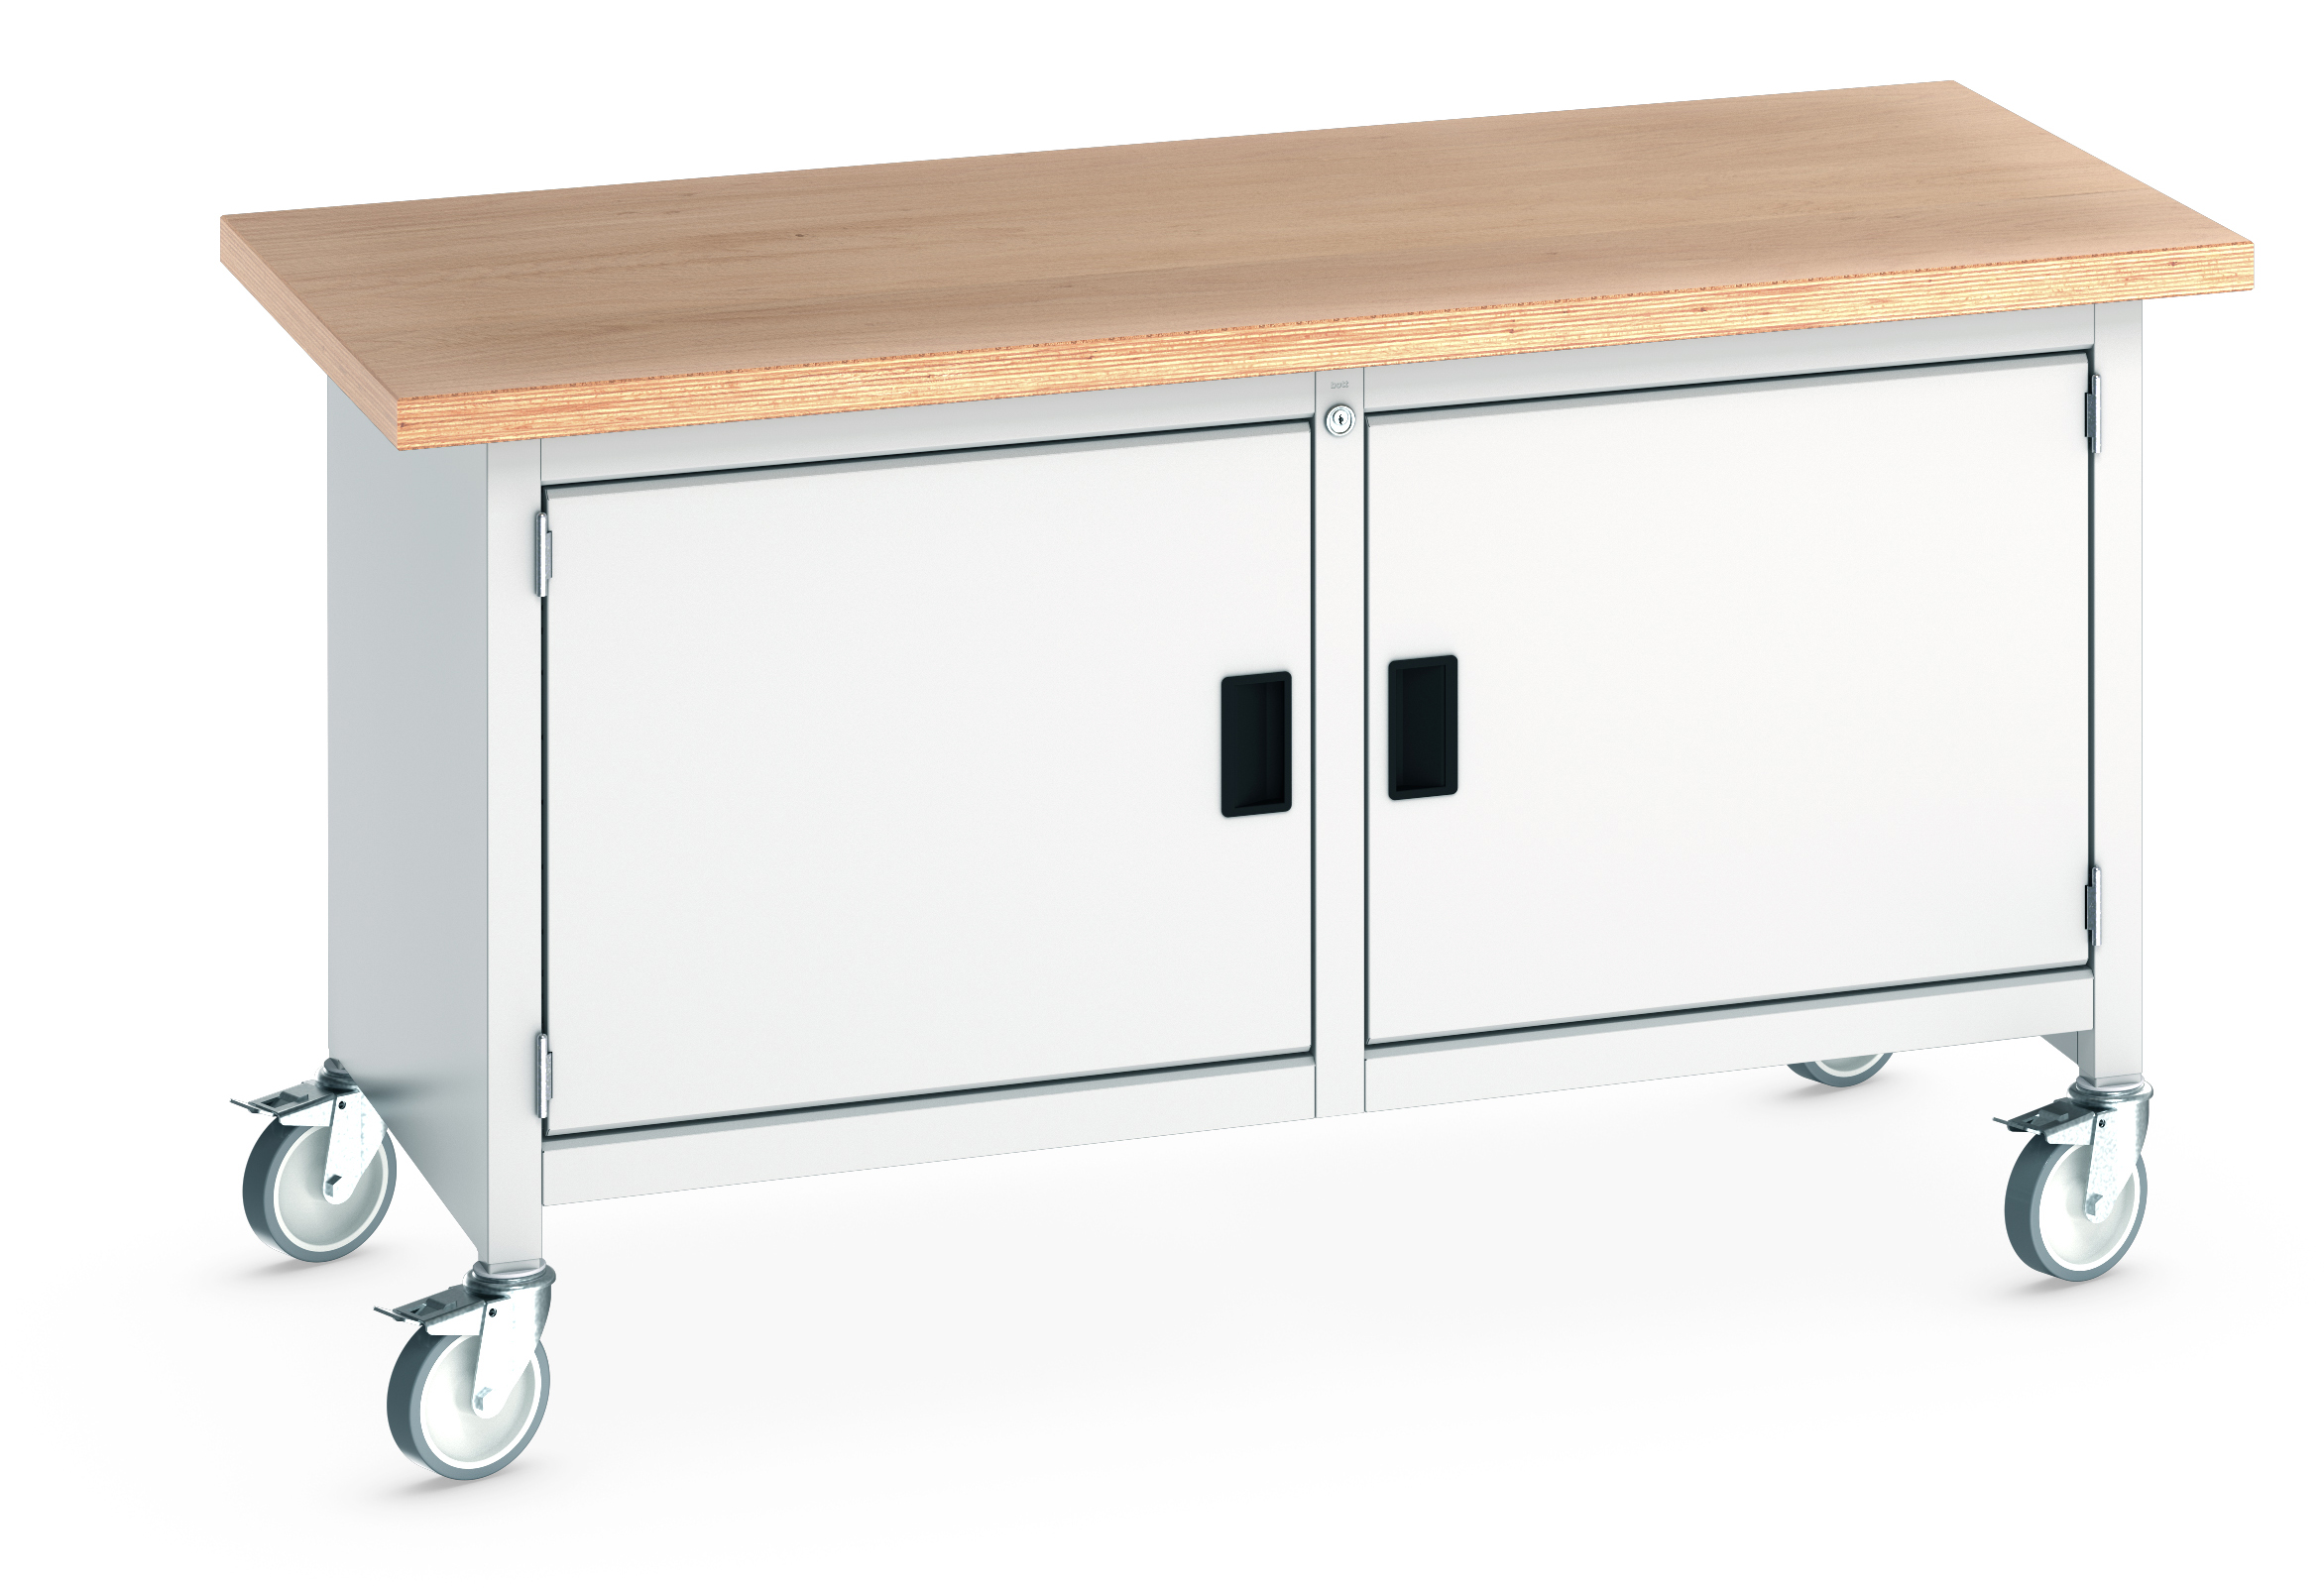 Bott Cubio Mobile Storage Bench With Full Cupboard / Full Cupboard - 41002097.16V